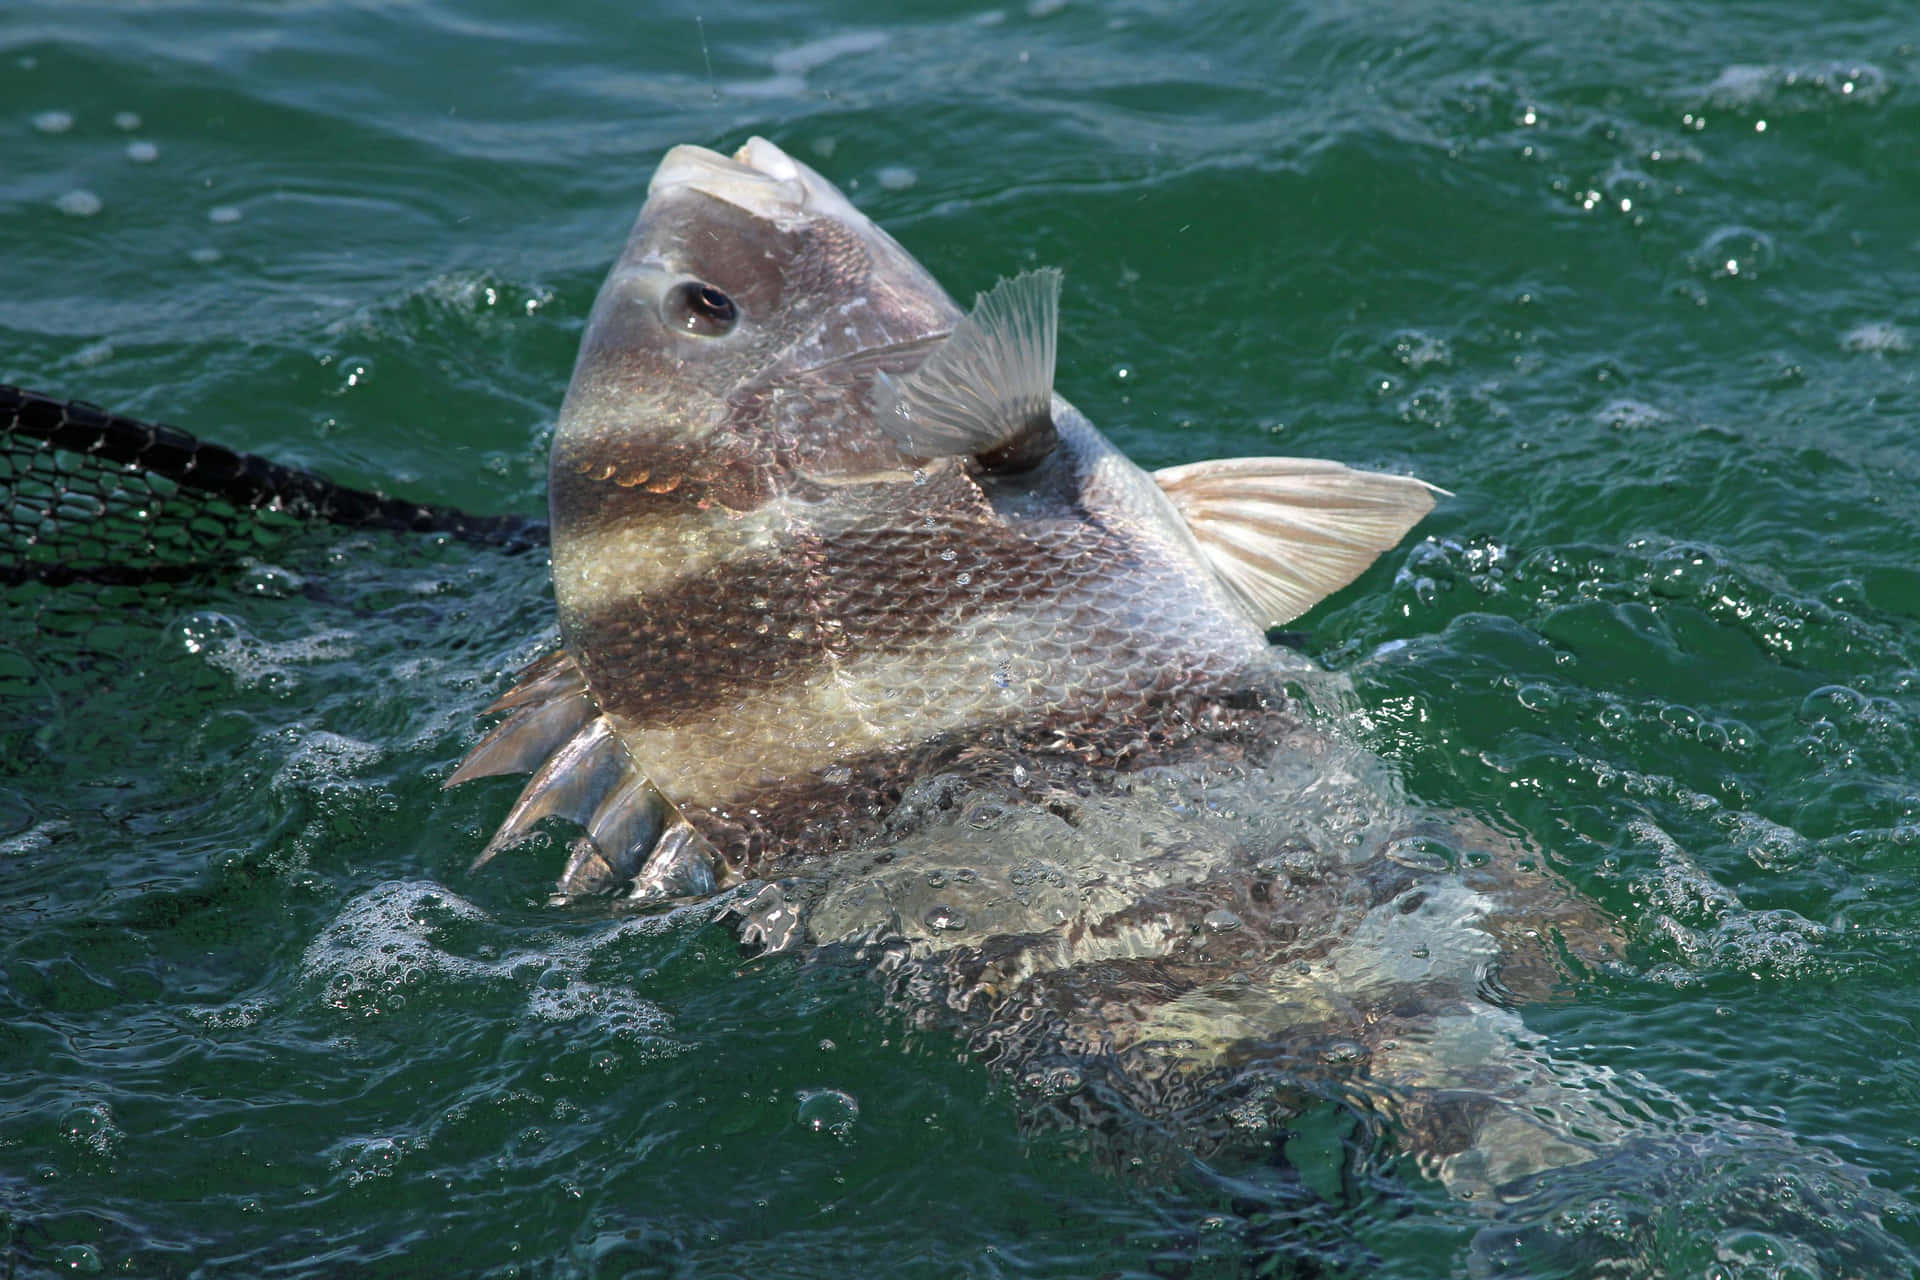 A Colorful Sheepshead Fish Lurking Nearby